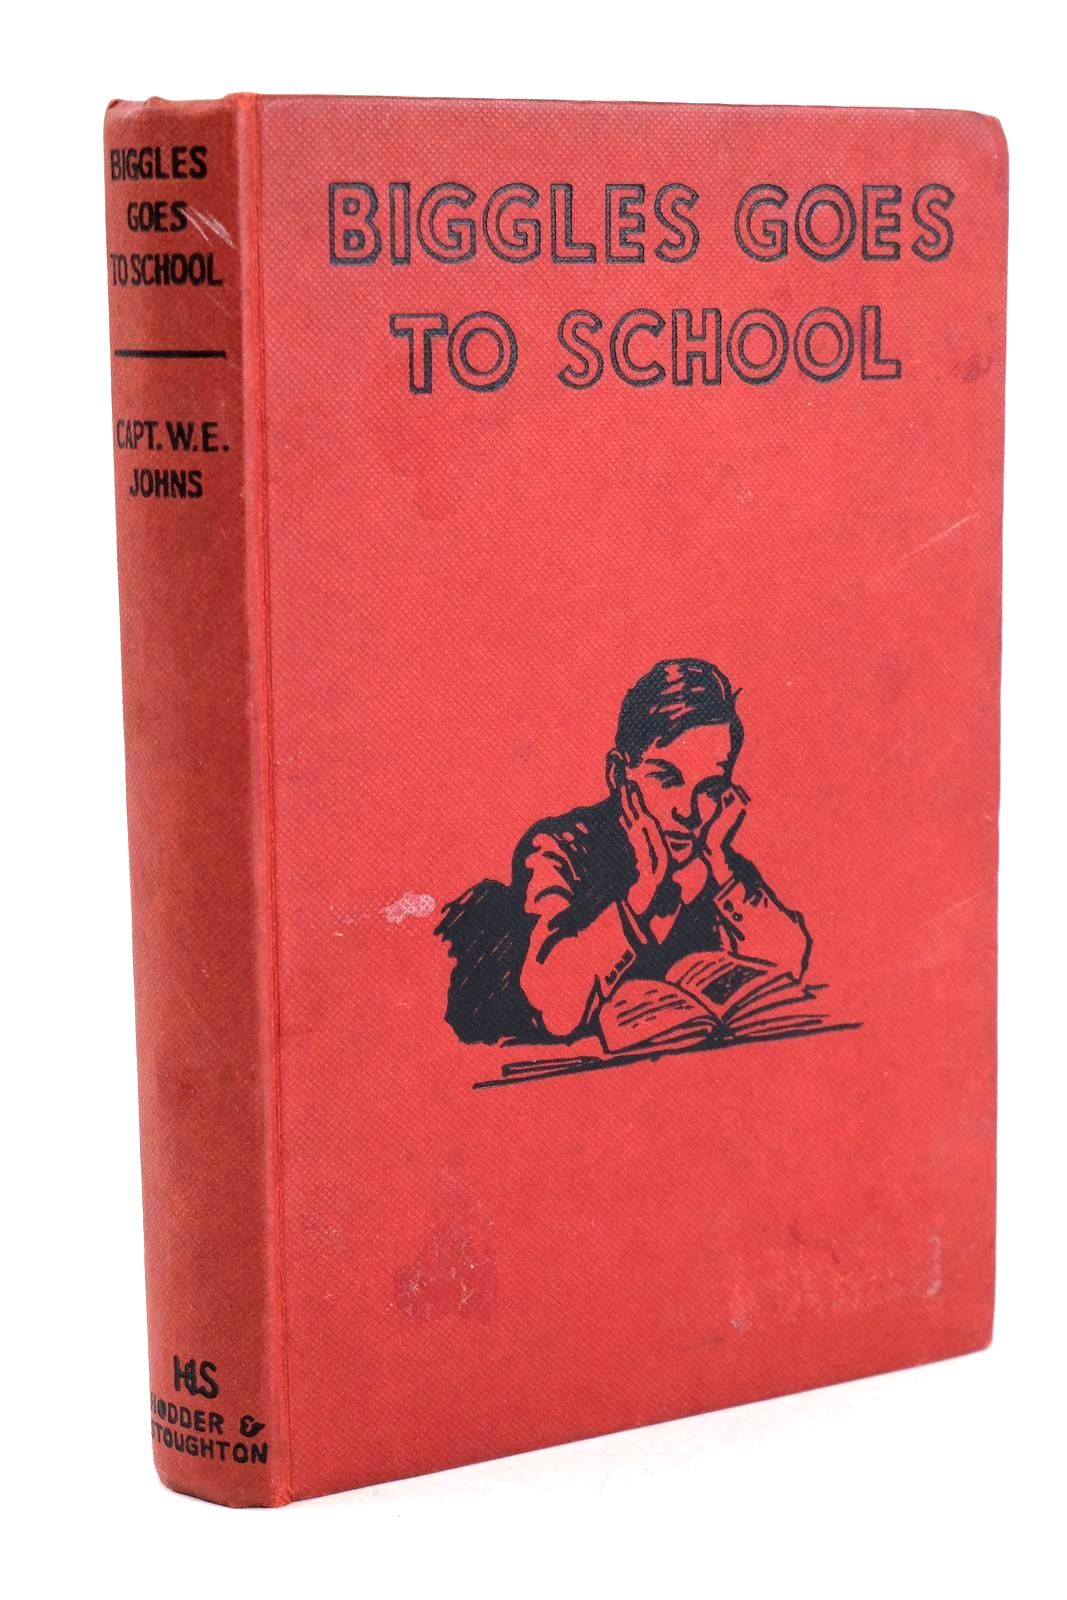 Photo of BIGGLES GOES TO SCHOOL written by Johns, W.E. illustrated by Stead,  published by Hodder &amp; Stoughton (STOCK CODE: 1326616)  for sale by Stella & Rose's Books